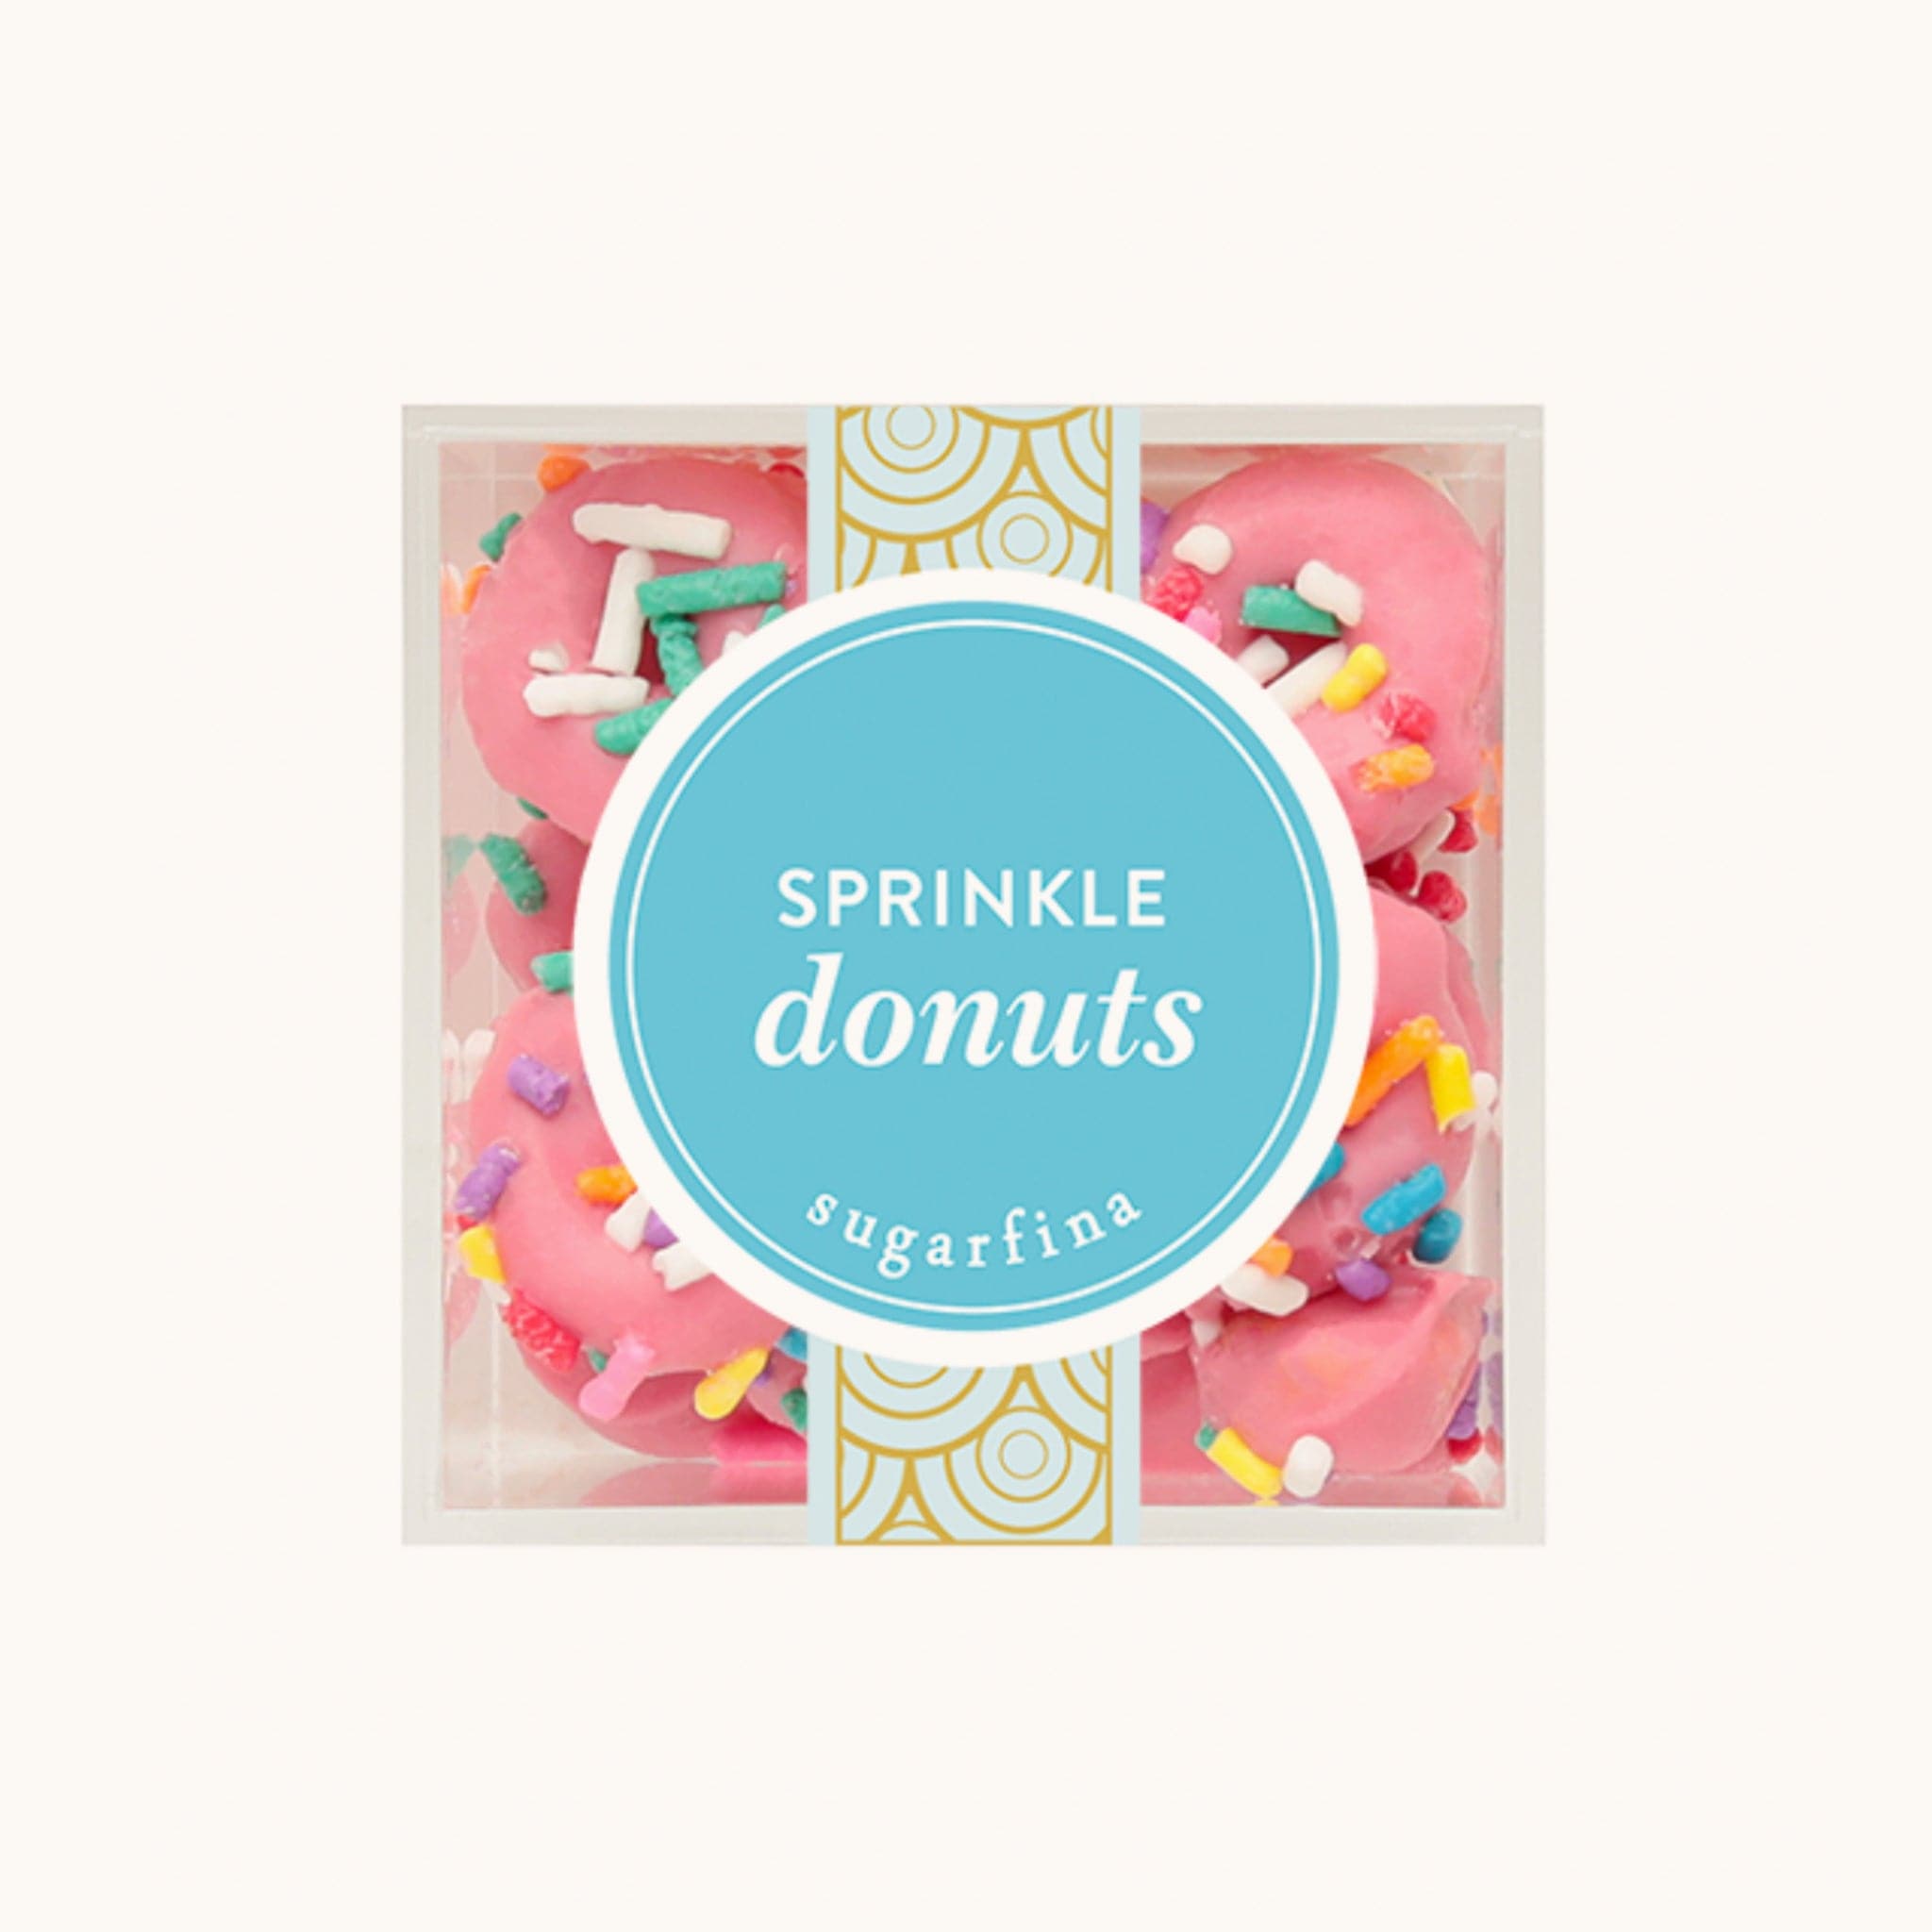 Plastic cube of miniature pink donut candies topped with colorful sprinkles. The box reads &#39;Sprinkle donuts&#39; across a teal circular logo. 